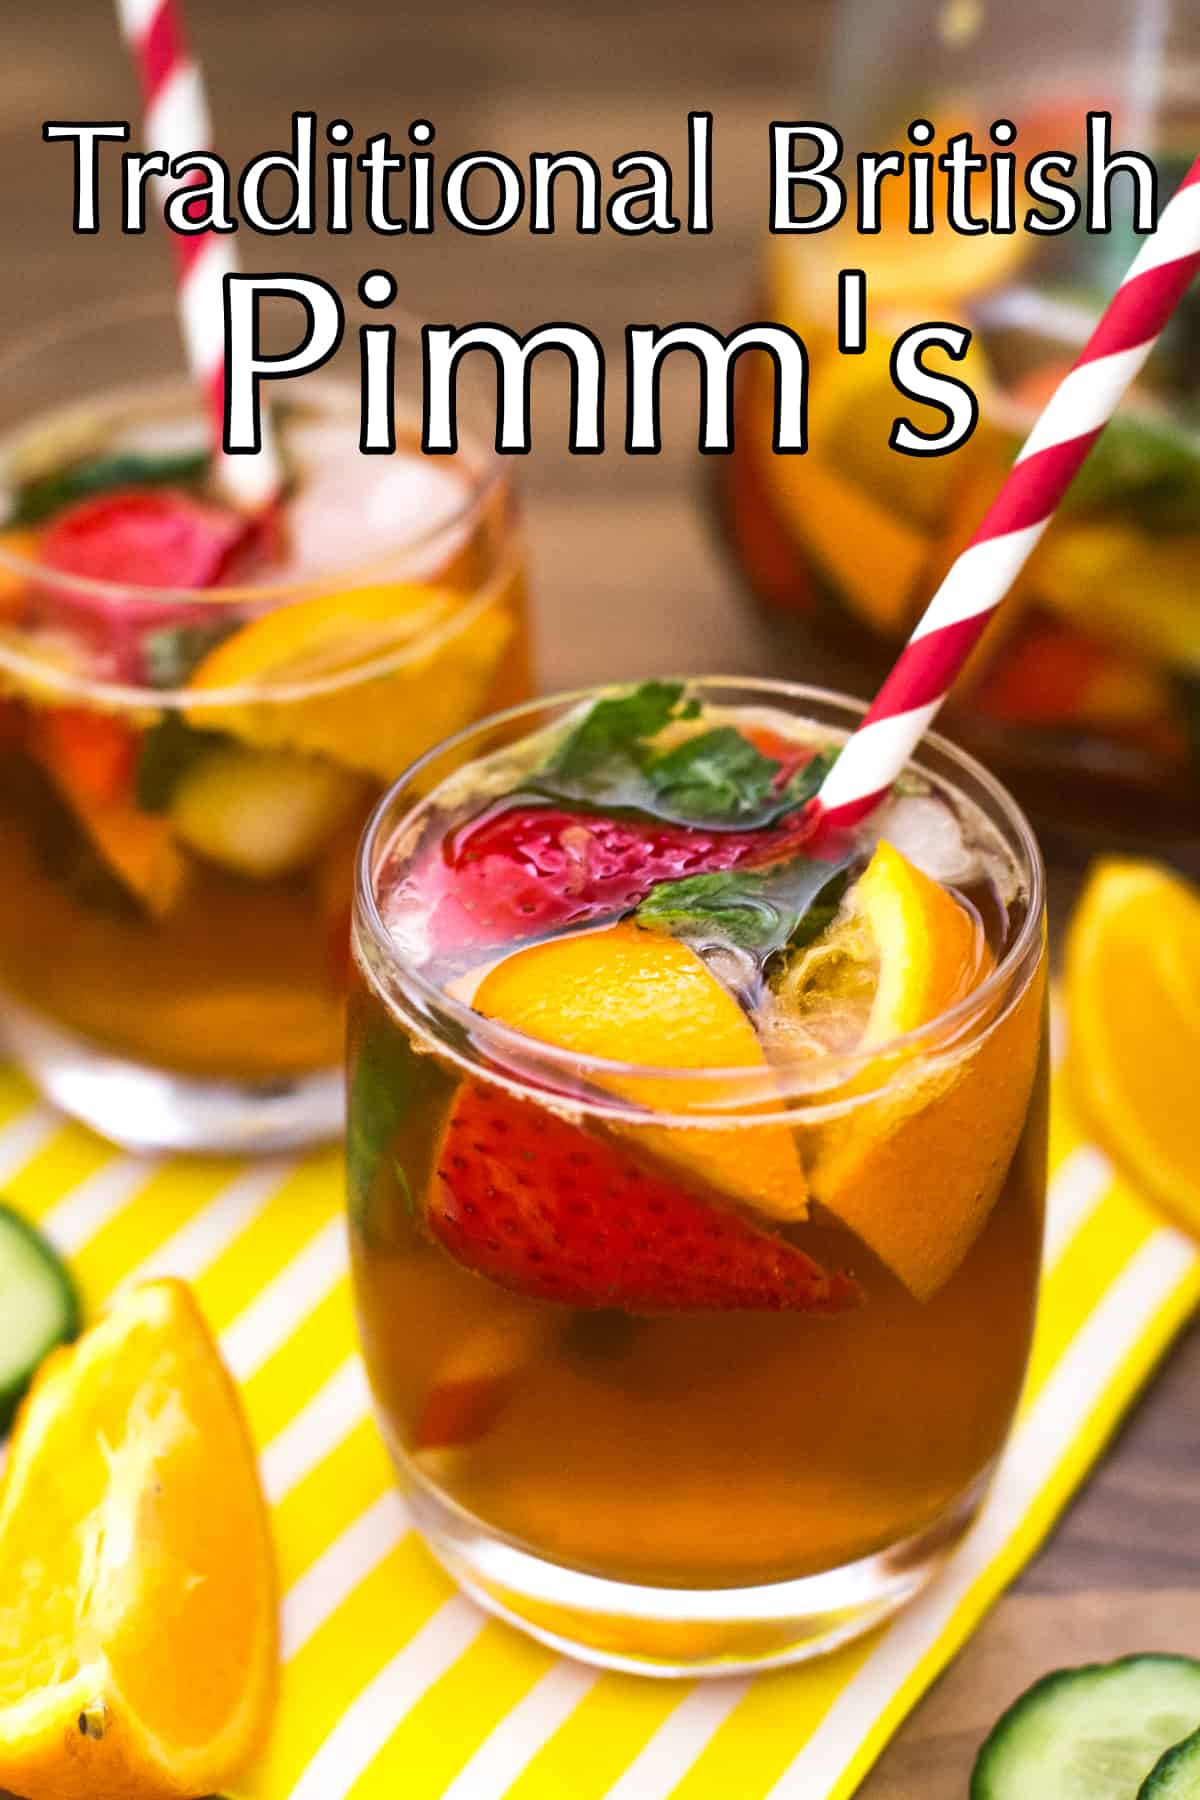 A glass of Pimm's with oranges, strawberries and mint, served with a stripey straw.